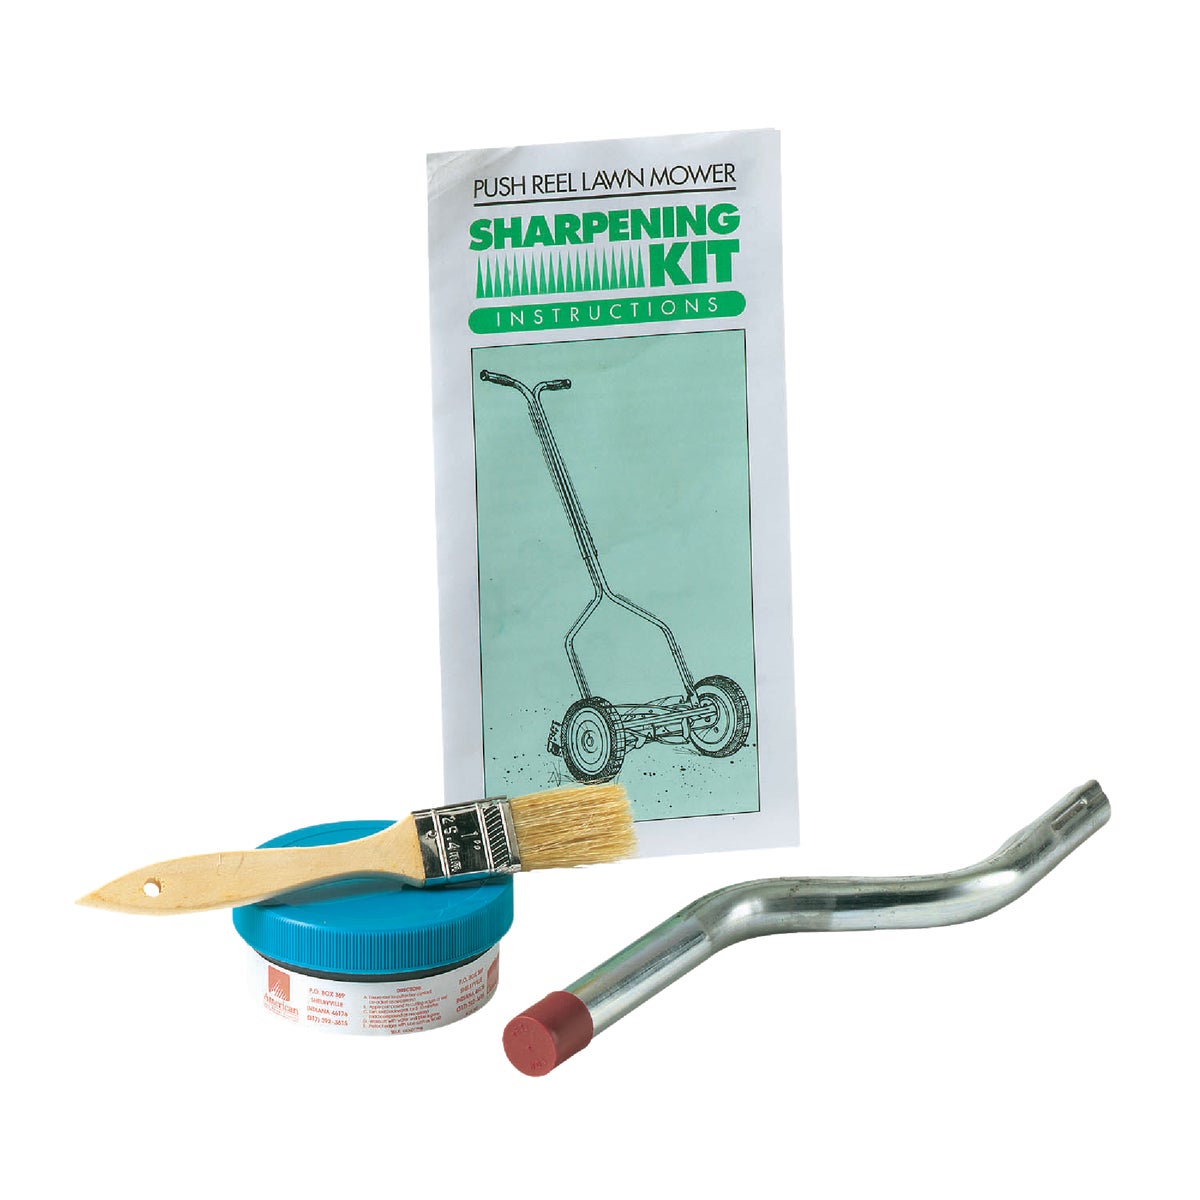 Item 728476, Sharpening kit for push reel lawn mower blades. Cut down on mowing time.